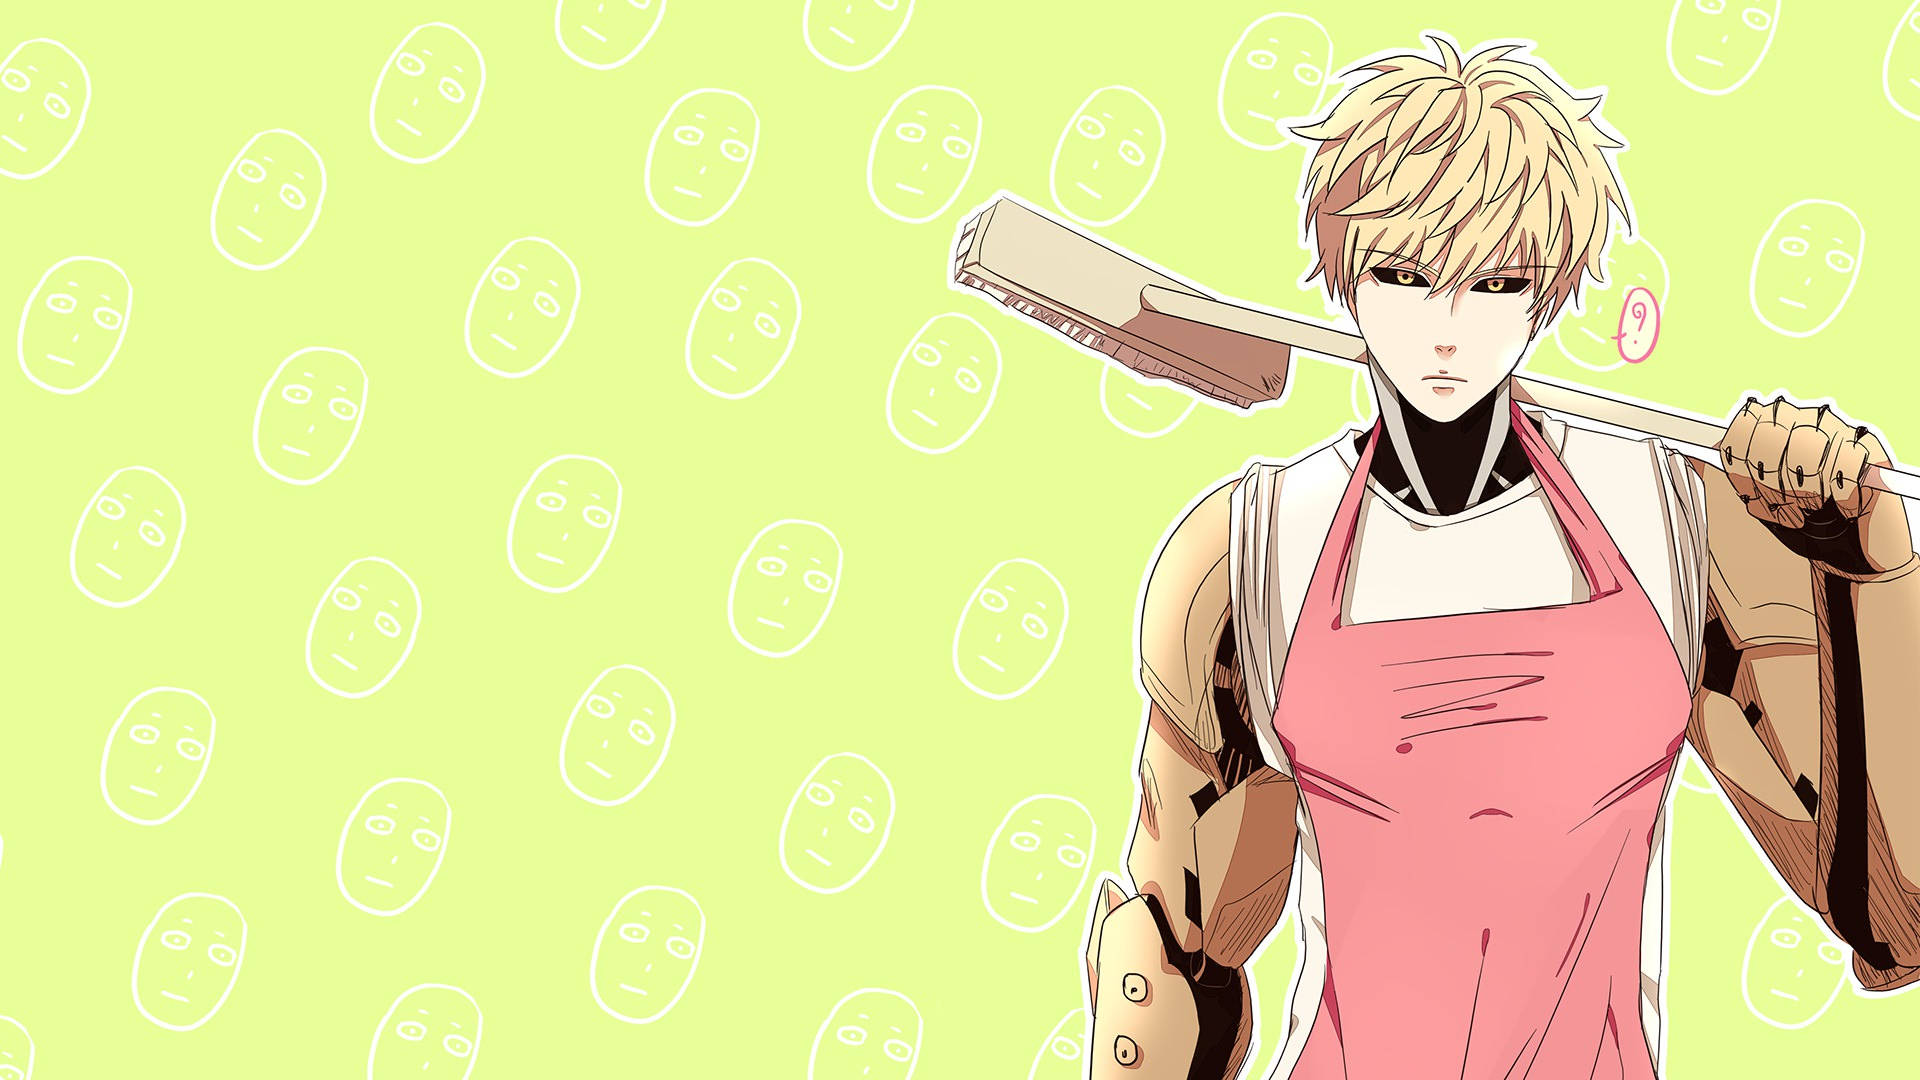 Genos, One Punch Man's Android Wallpaper